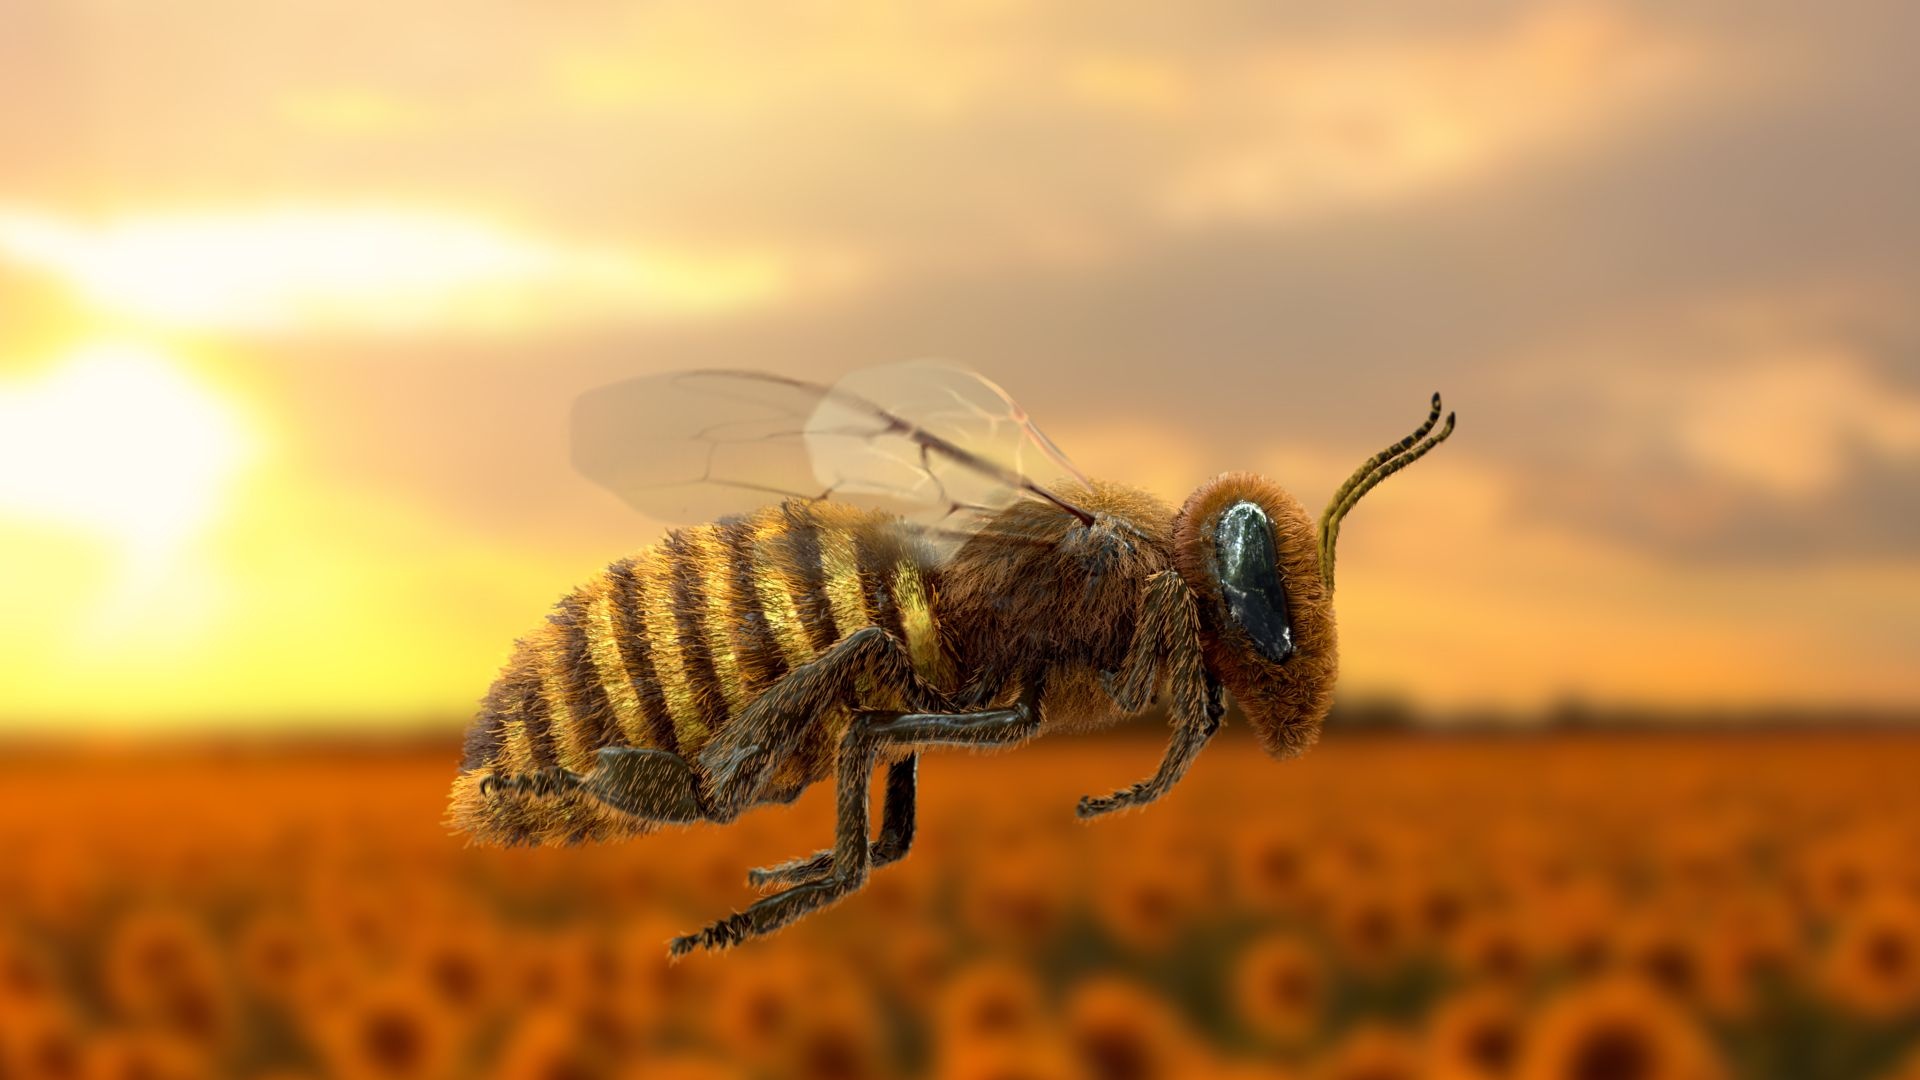 Bee: Flying honeybee, Pollinators for flowers, fruits and vegetables. 1920x1080 Full HD Background.